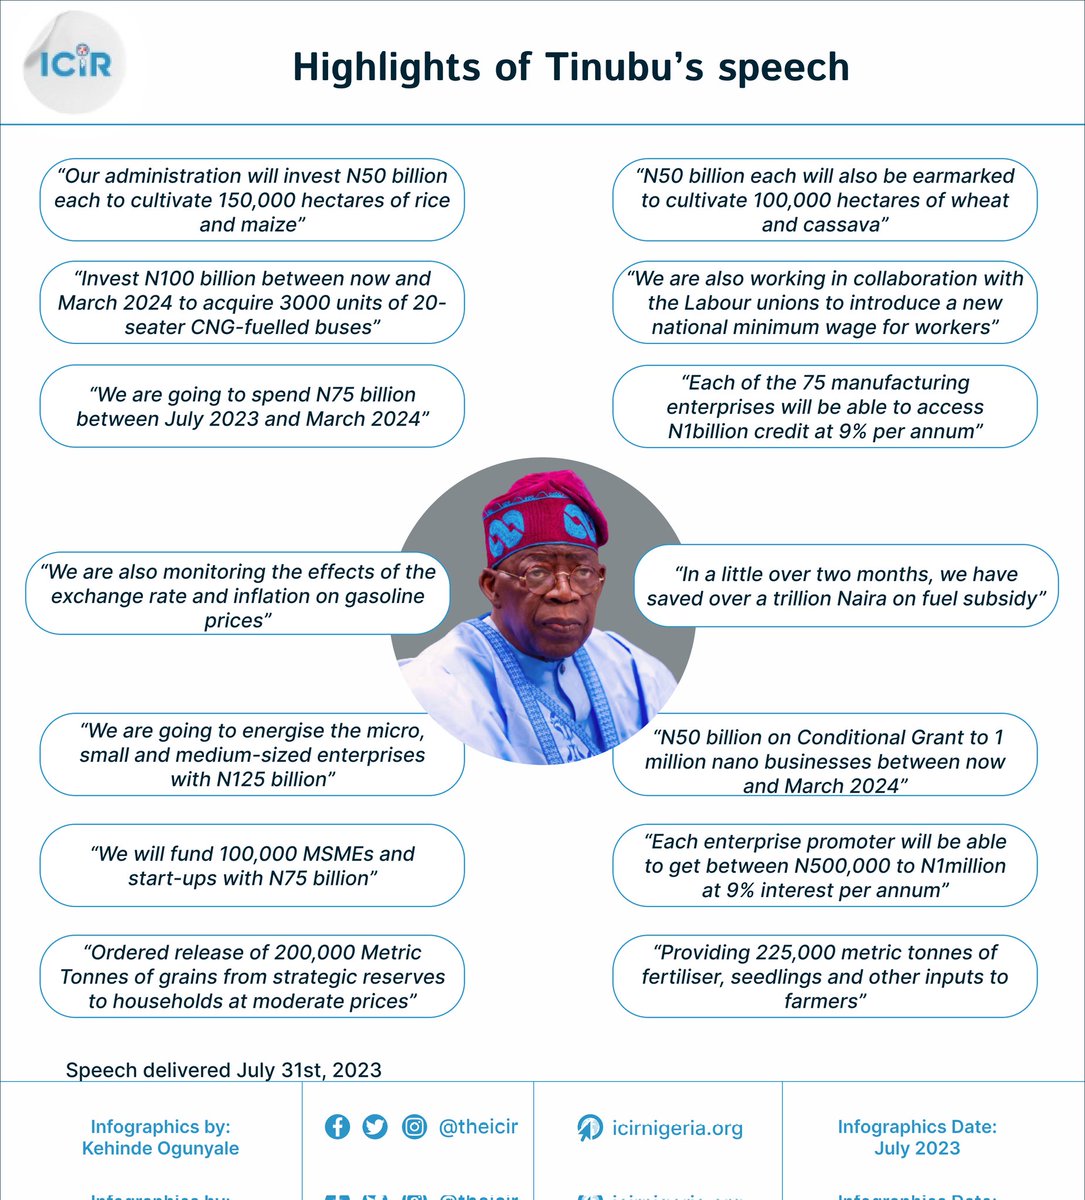 Incase you missed the nationwide broadcast by President @officialABAT

Here's an infographic showing highlights of Tinubu's speech  

More on it here: icirnigeria.org/tinubu-lists-p…

#Tinubu #ECOMOG #fuelsubsidy #NLCProtest #Mewat #CNG